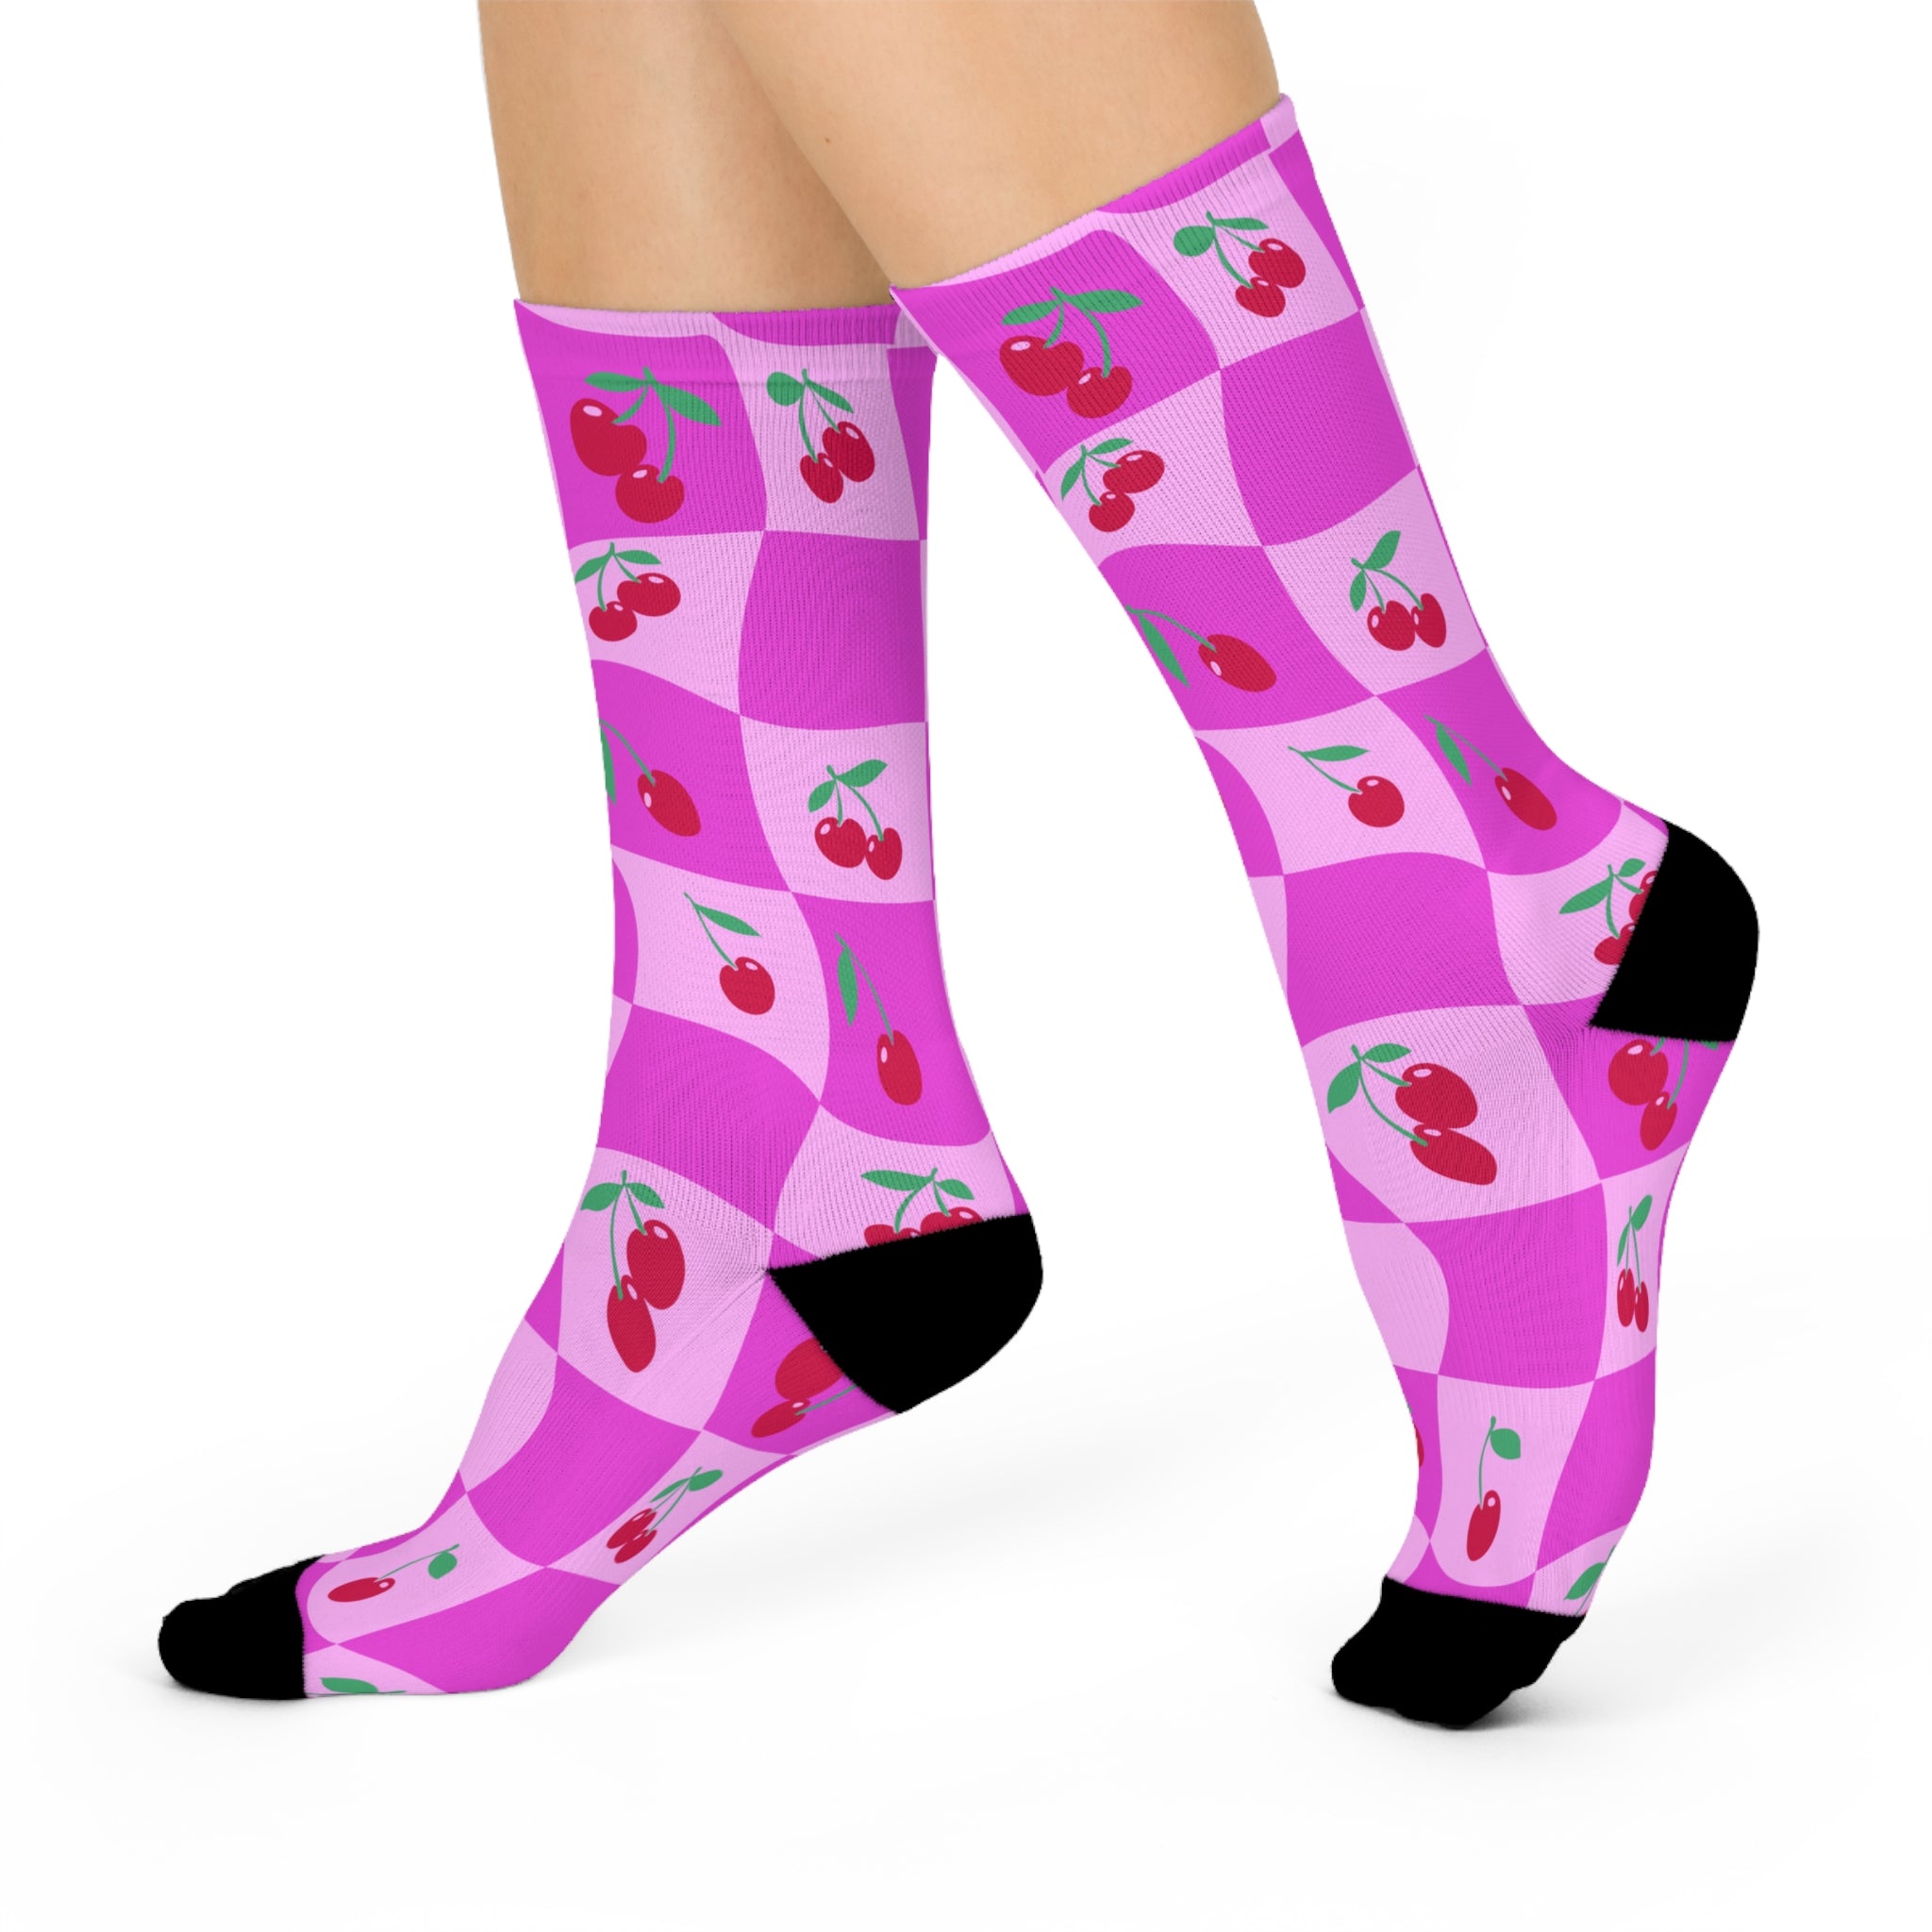 Pink and magenta checkerboard socks with cherry print. Retro-inspired design with a coquette aesthetic by Honey Dazed.